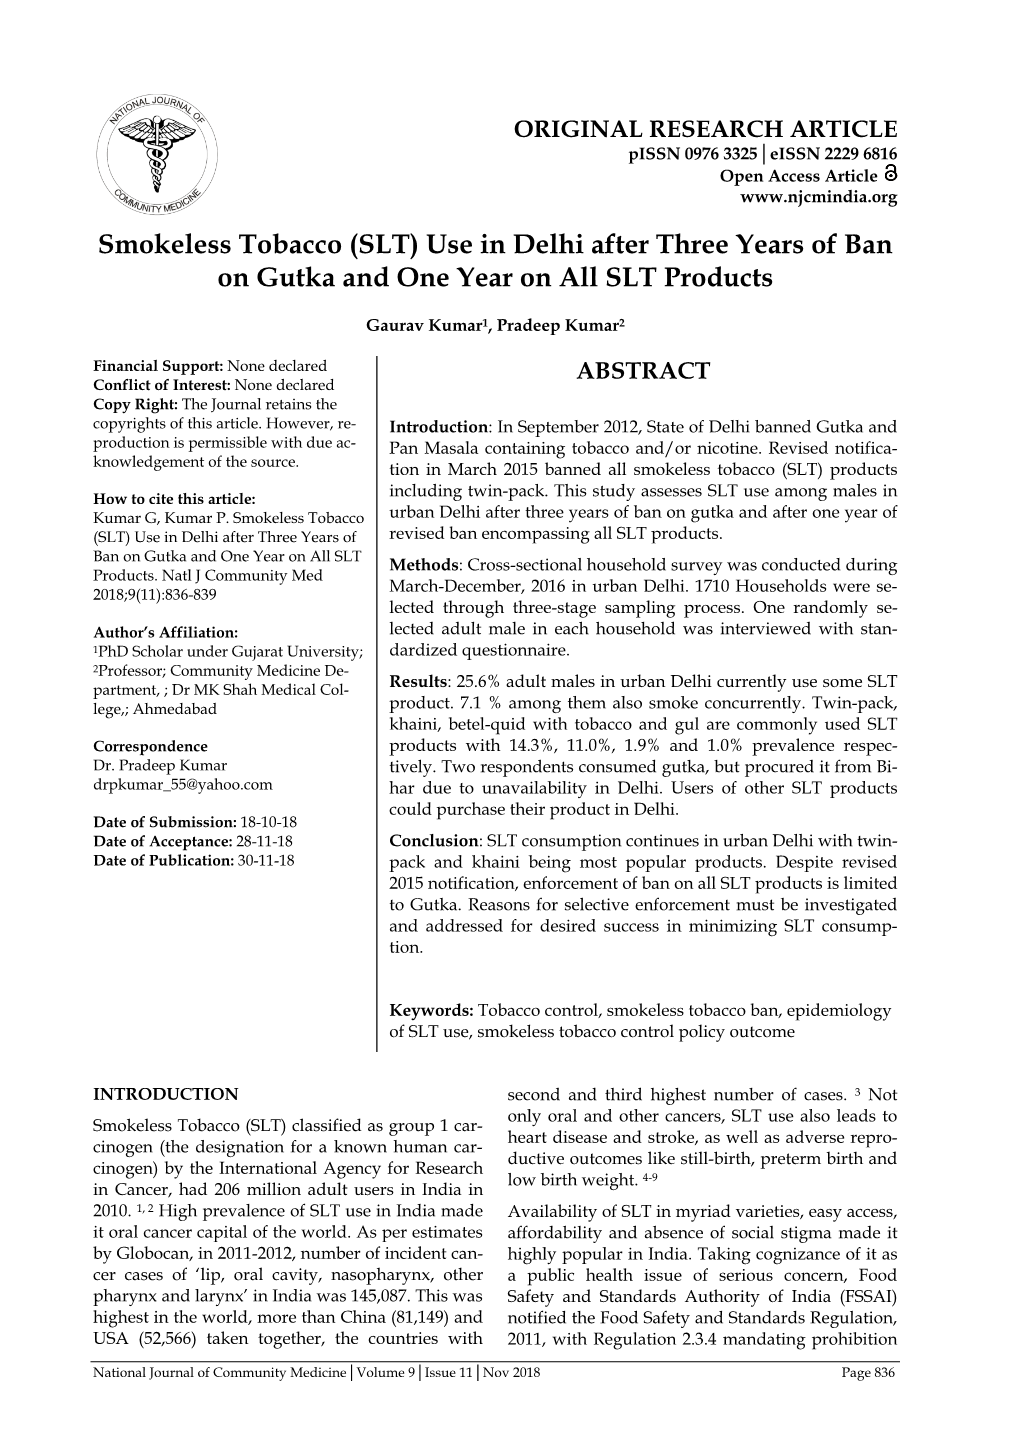 Smokeless Tobacco (SLT) Use in Delhi After Three Years of Ban on Gutka and One Year on All SLT Products